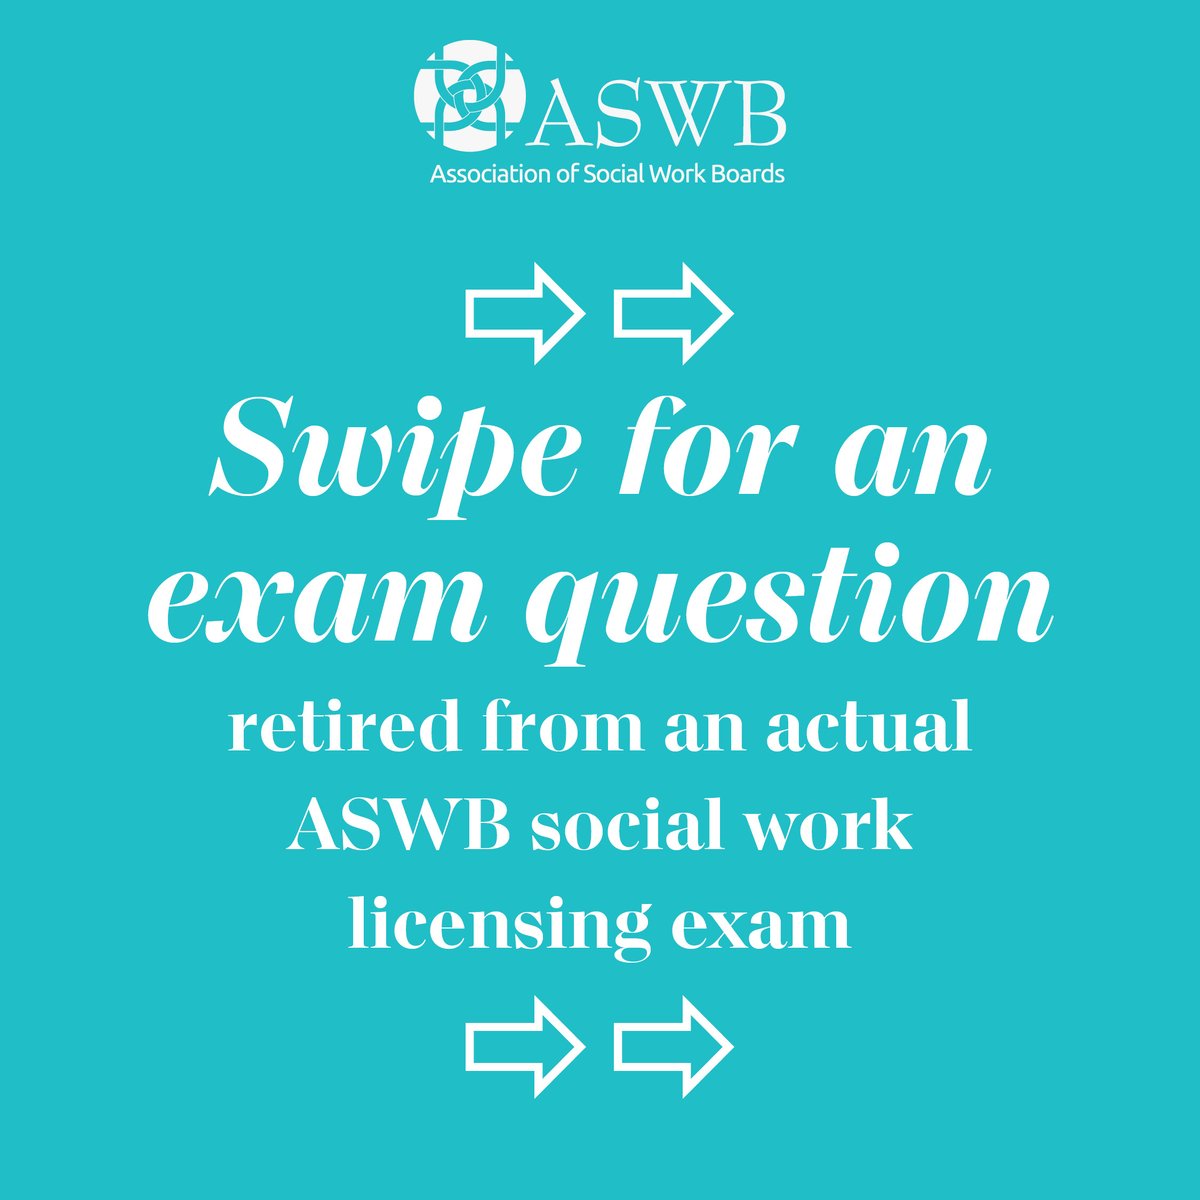 Check out ASWB’s practice question series on Instagram! Test your #SocialWork knowledge with a sample question retired from a social work licensing exam. #SocialWorkExam